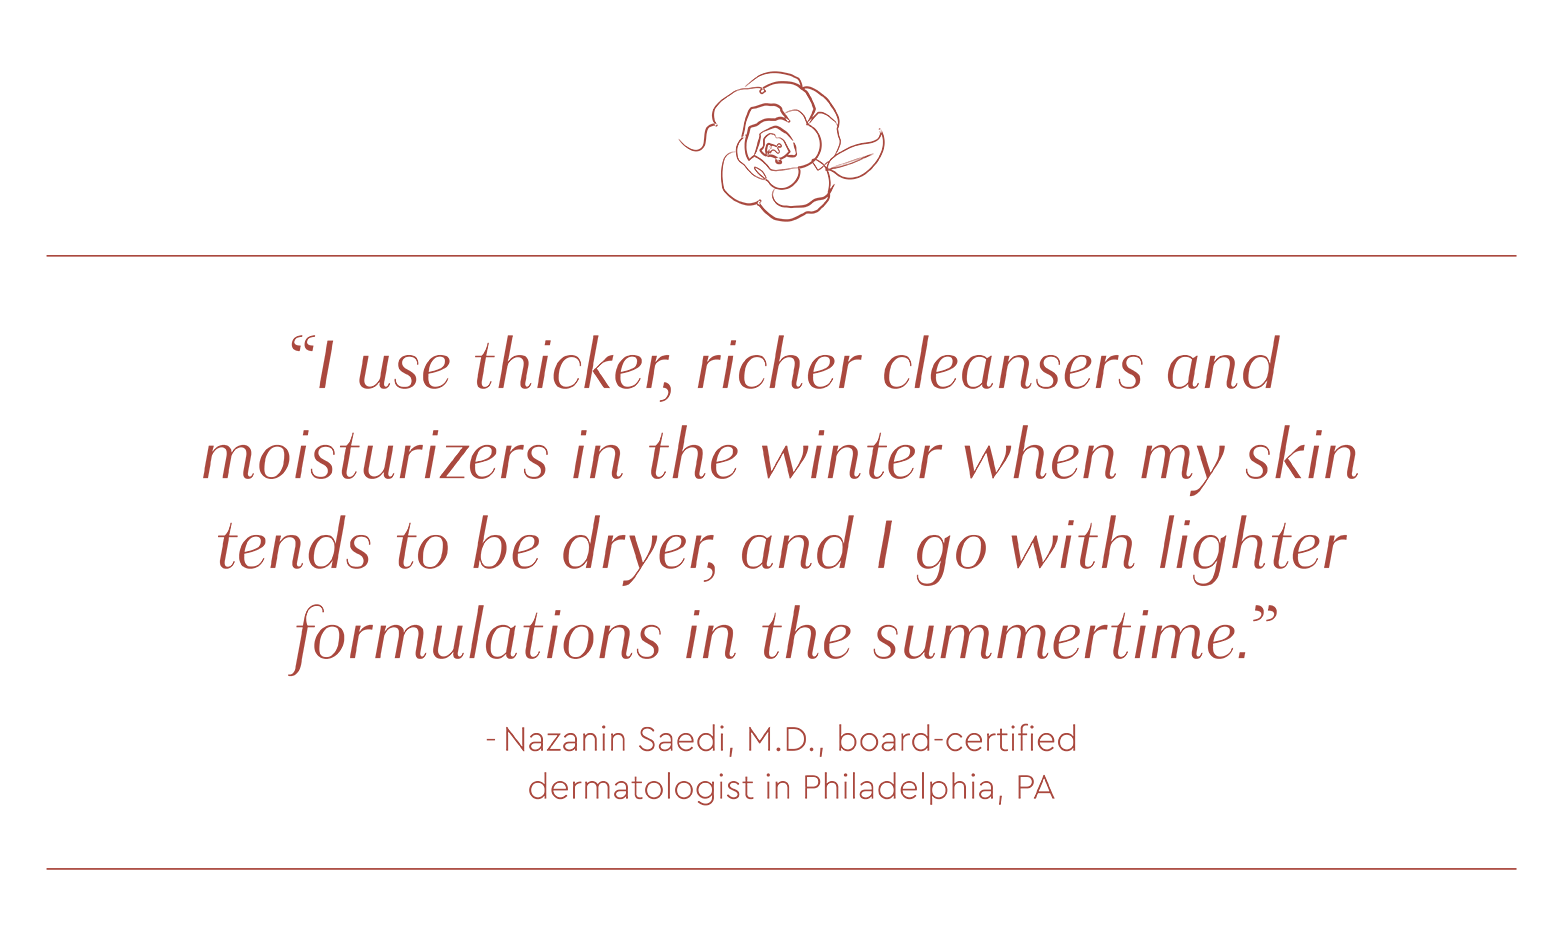 Quote by Nazanin Saedi: "I use thicker, richer cleansers and moisturizers in the winter when my skin tends to be dryer, and I go with lighter formulation in the summertime."